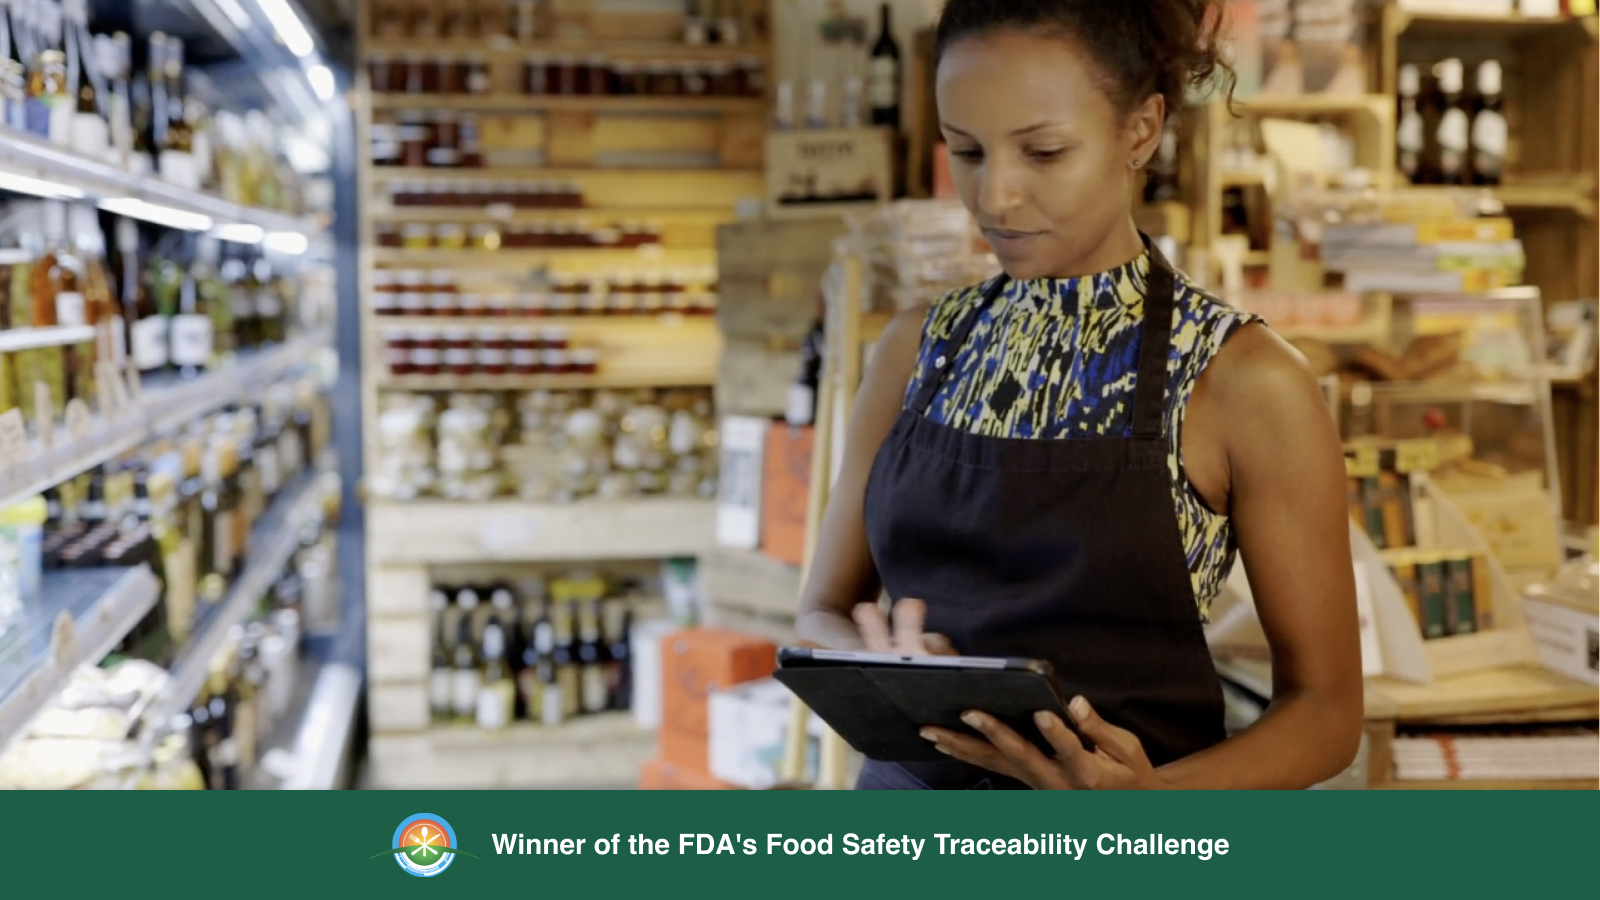 Winner of the FDA's Food Safety Traceability Challenge